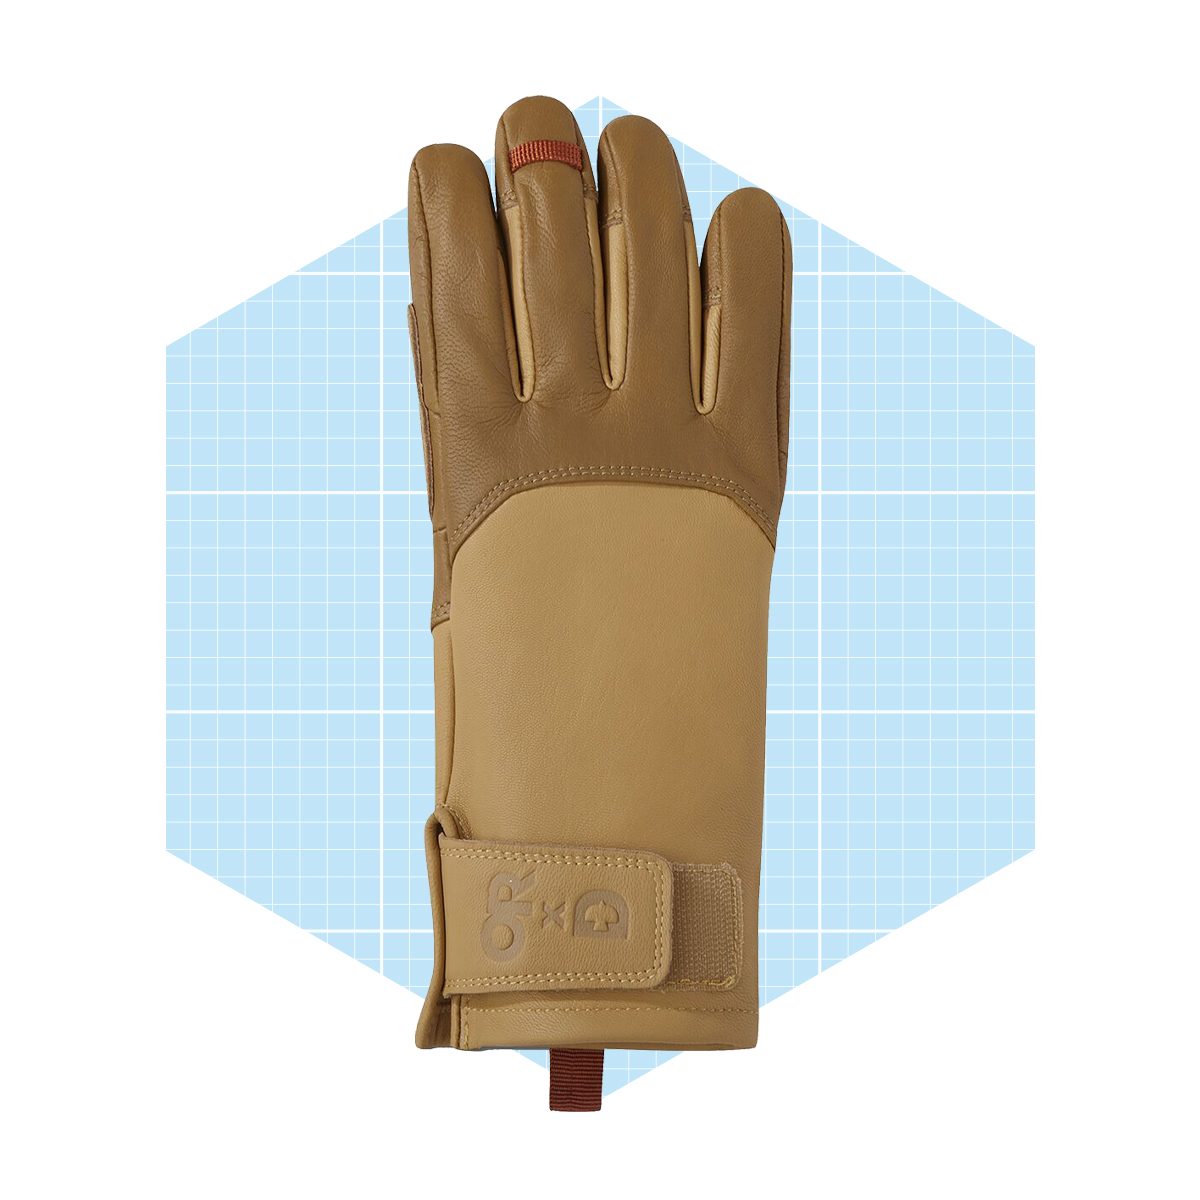 Dovetail Leather Field Glove Ecomm Backcountry.com